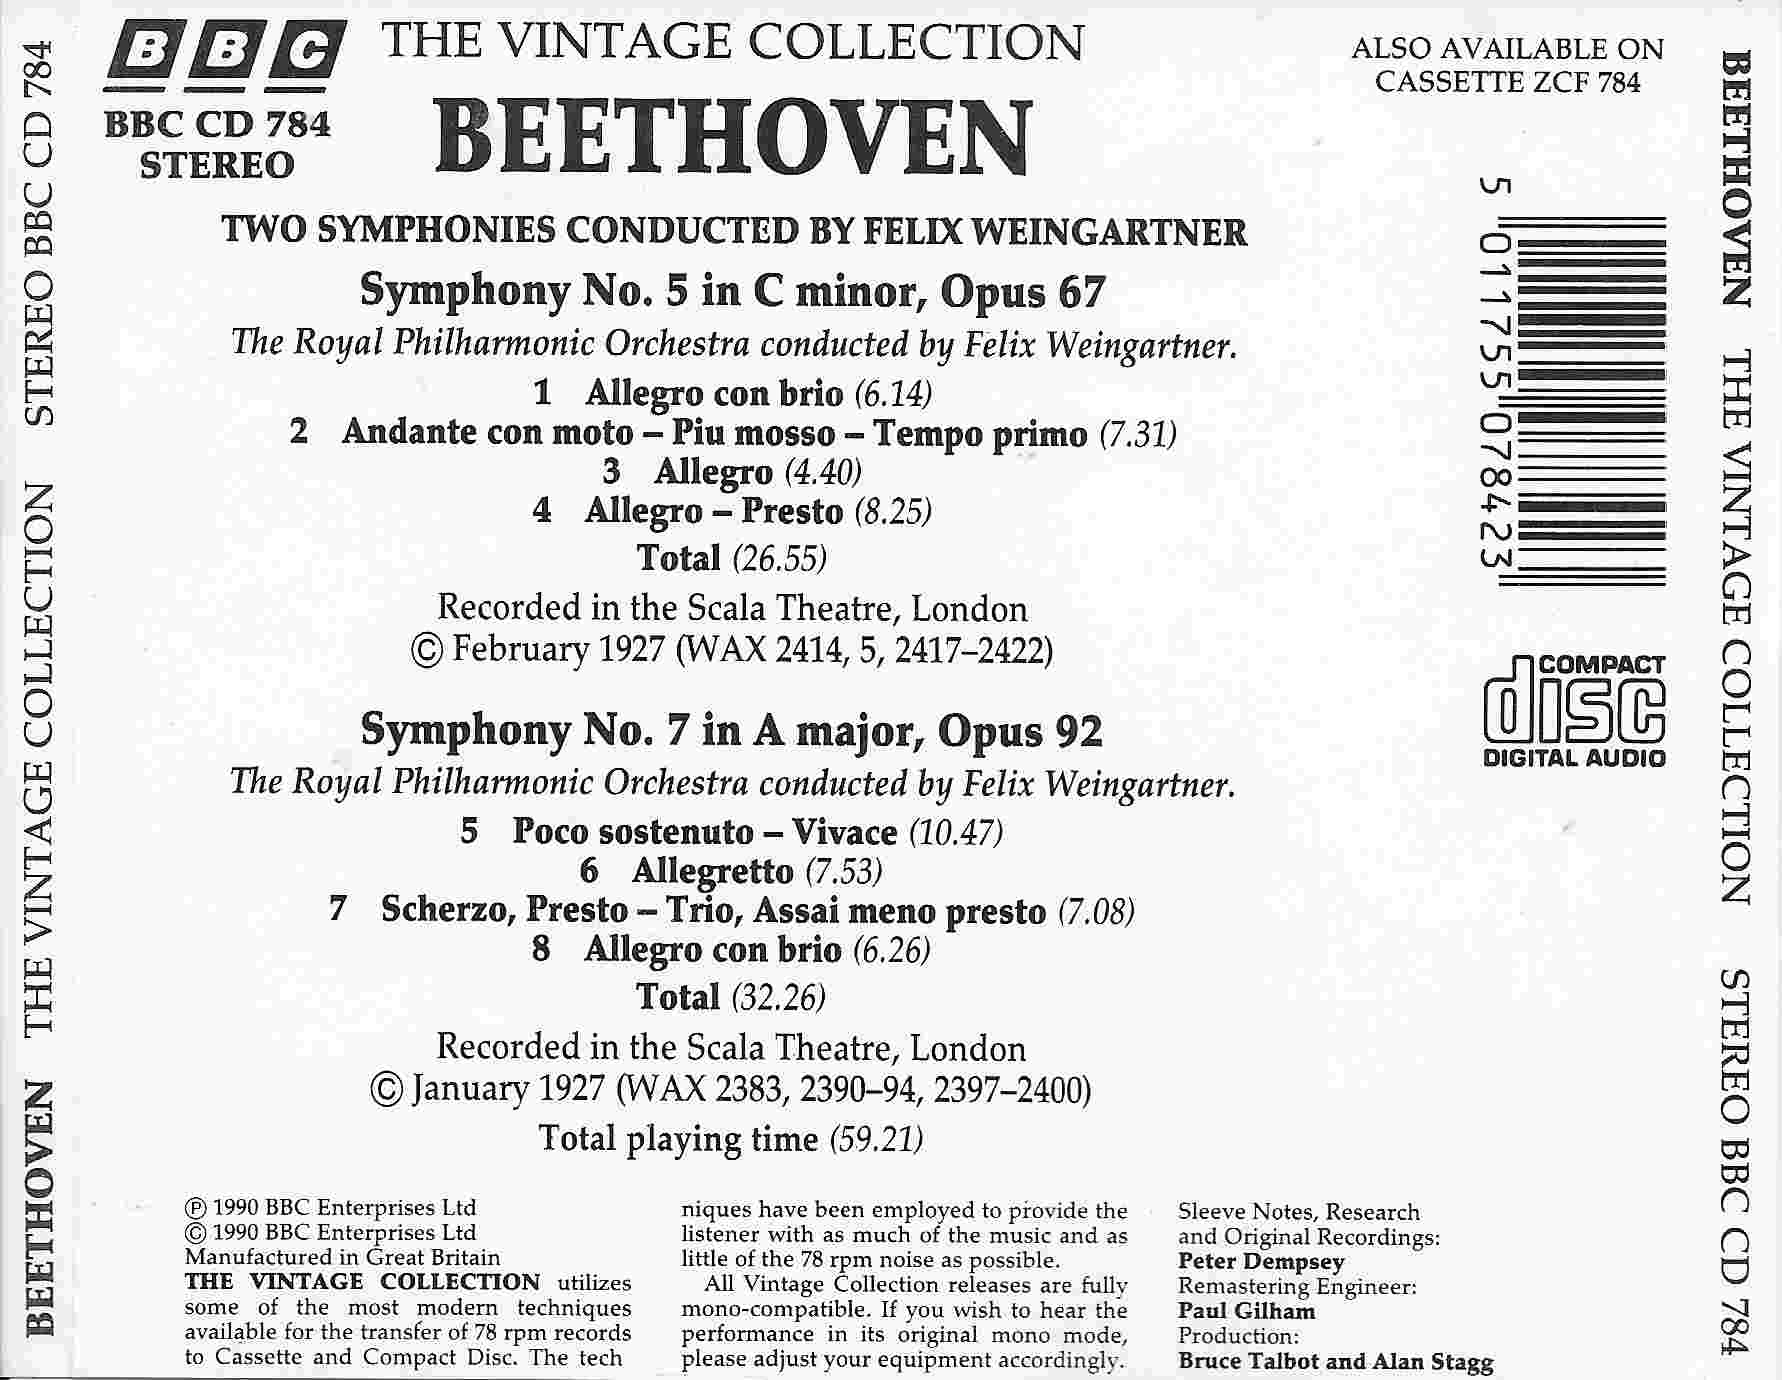 Picture of BBCCD784 The vintage collection - Beethoven / Weingartner by artist Beethoven / Weingartner from the BBC records and Tapes library